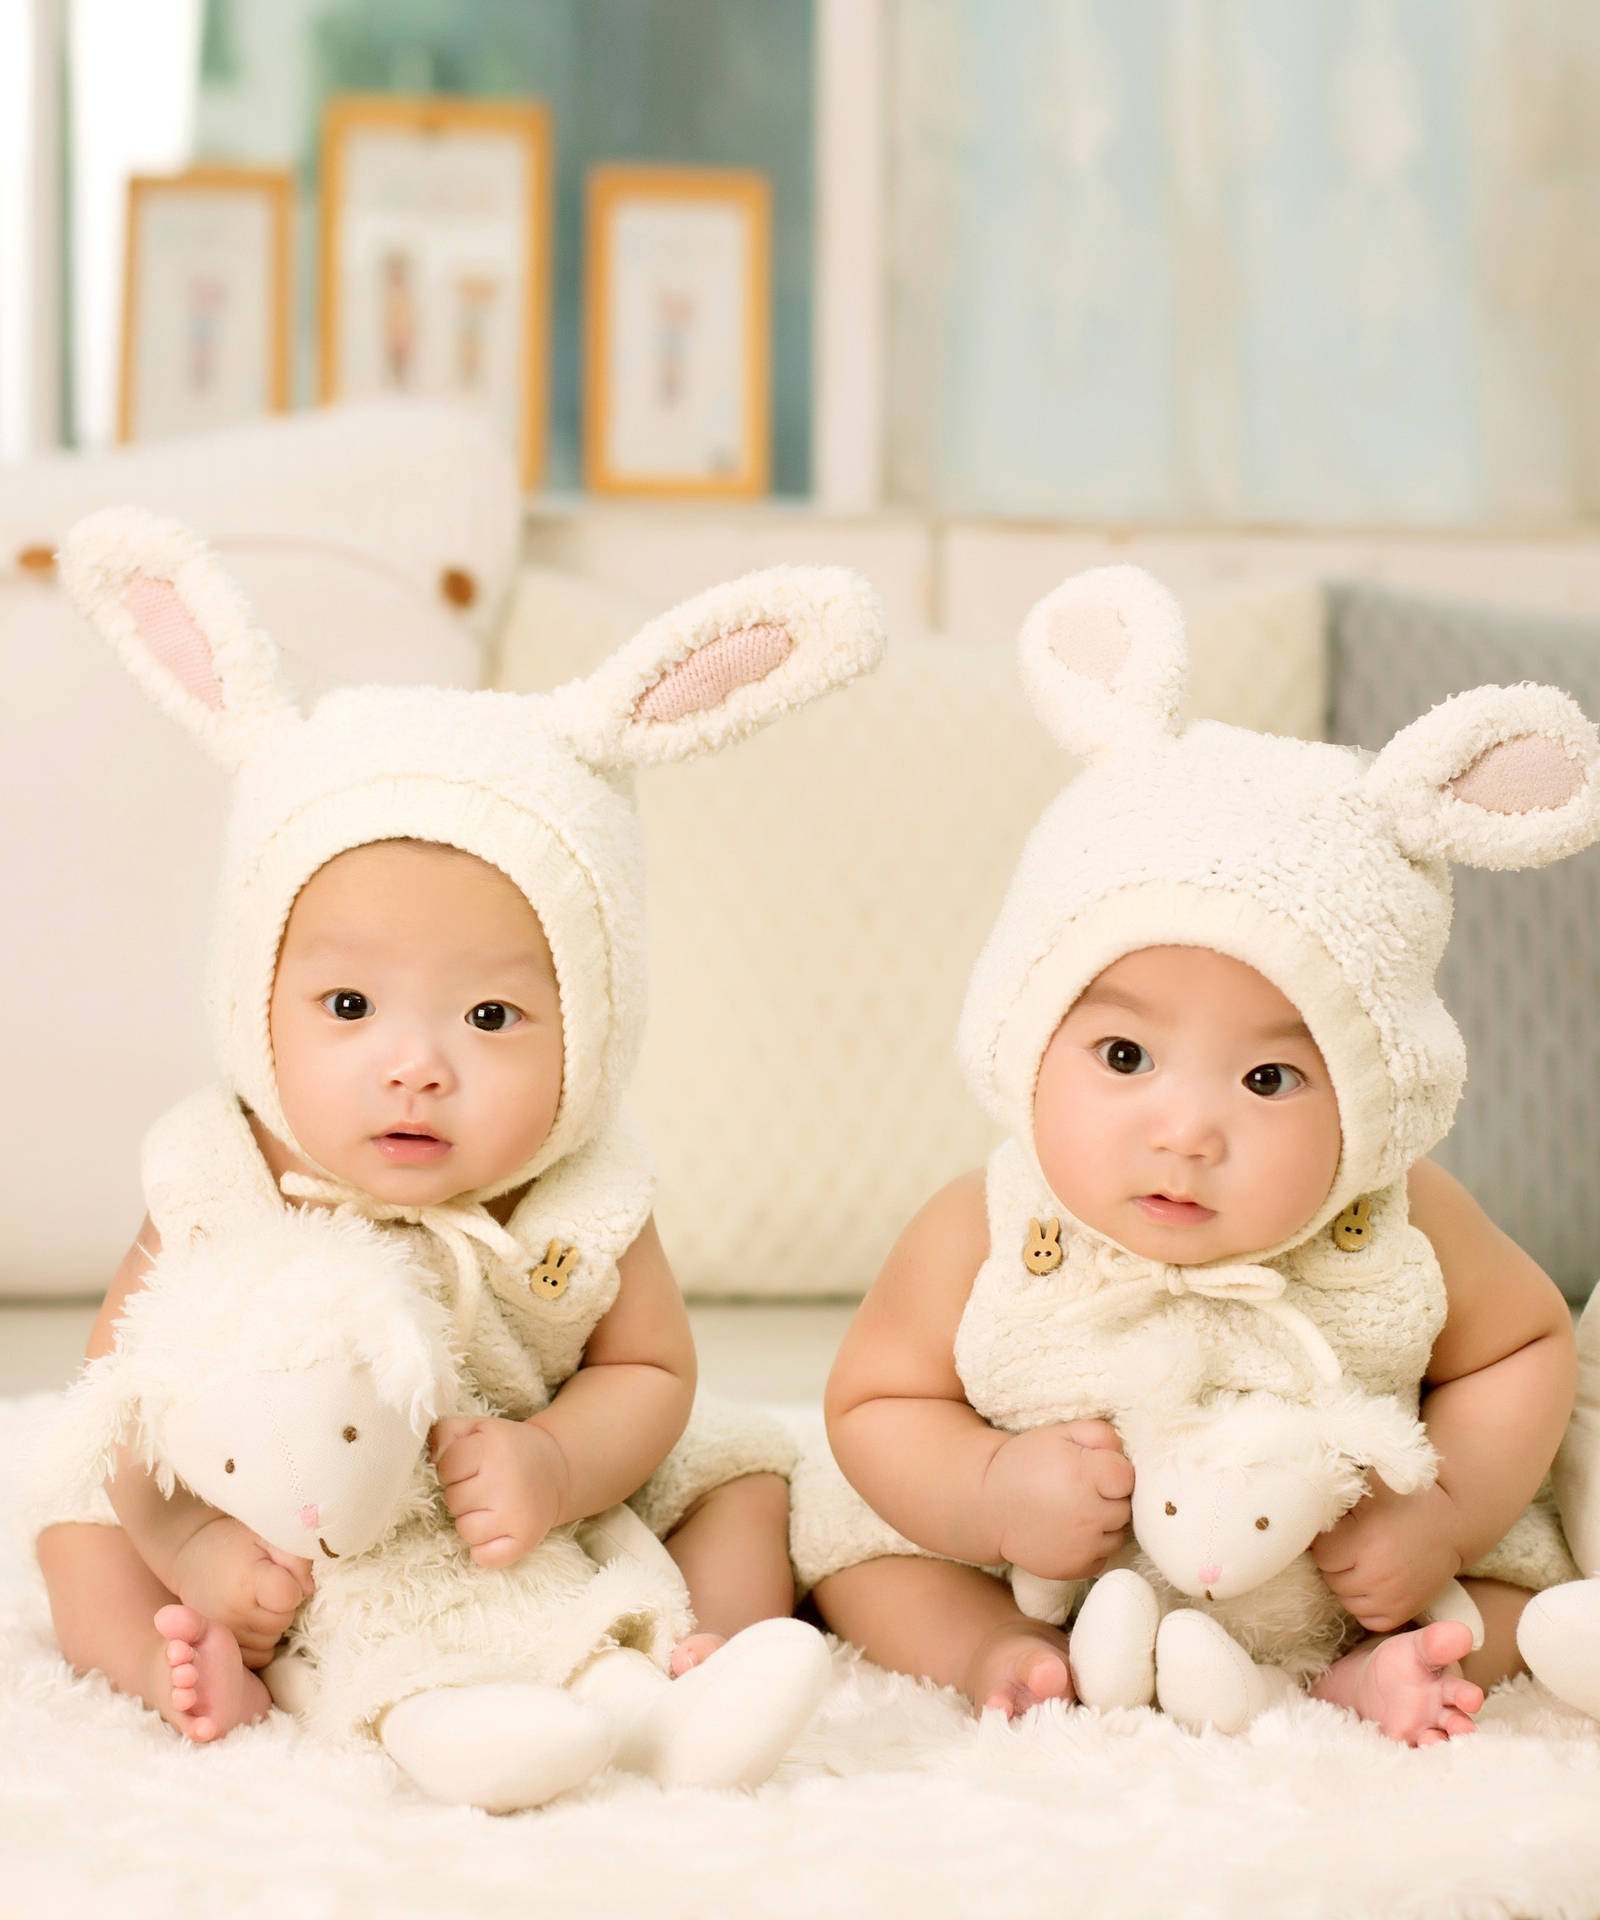 Cute Babies With Matching Bunny Bonnets Background